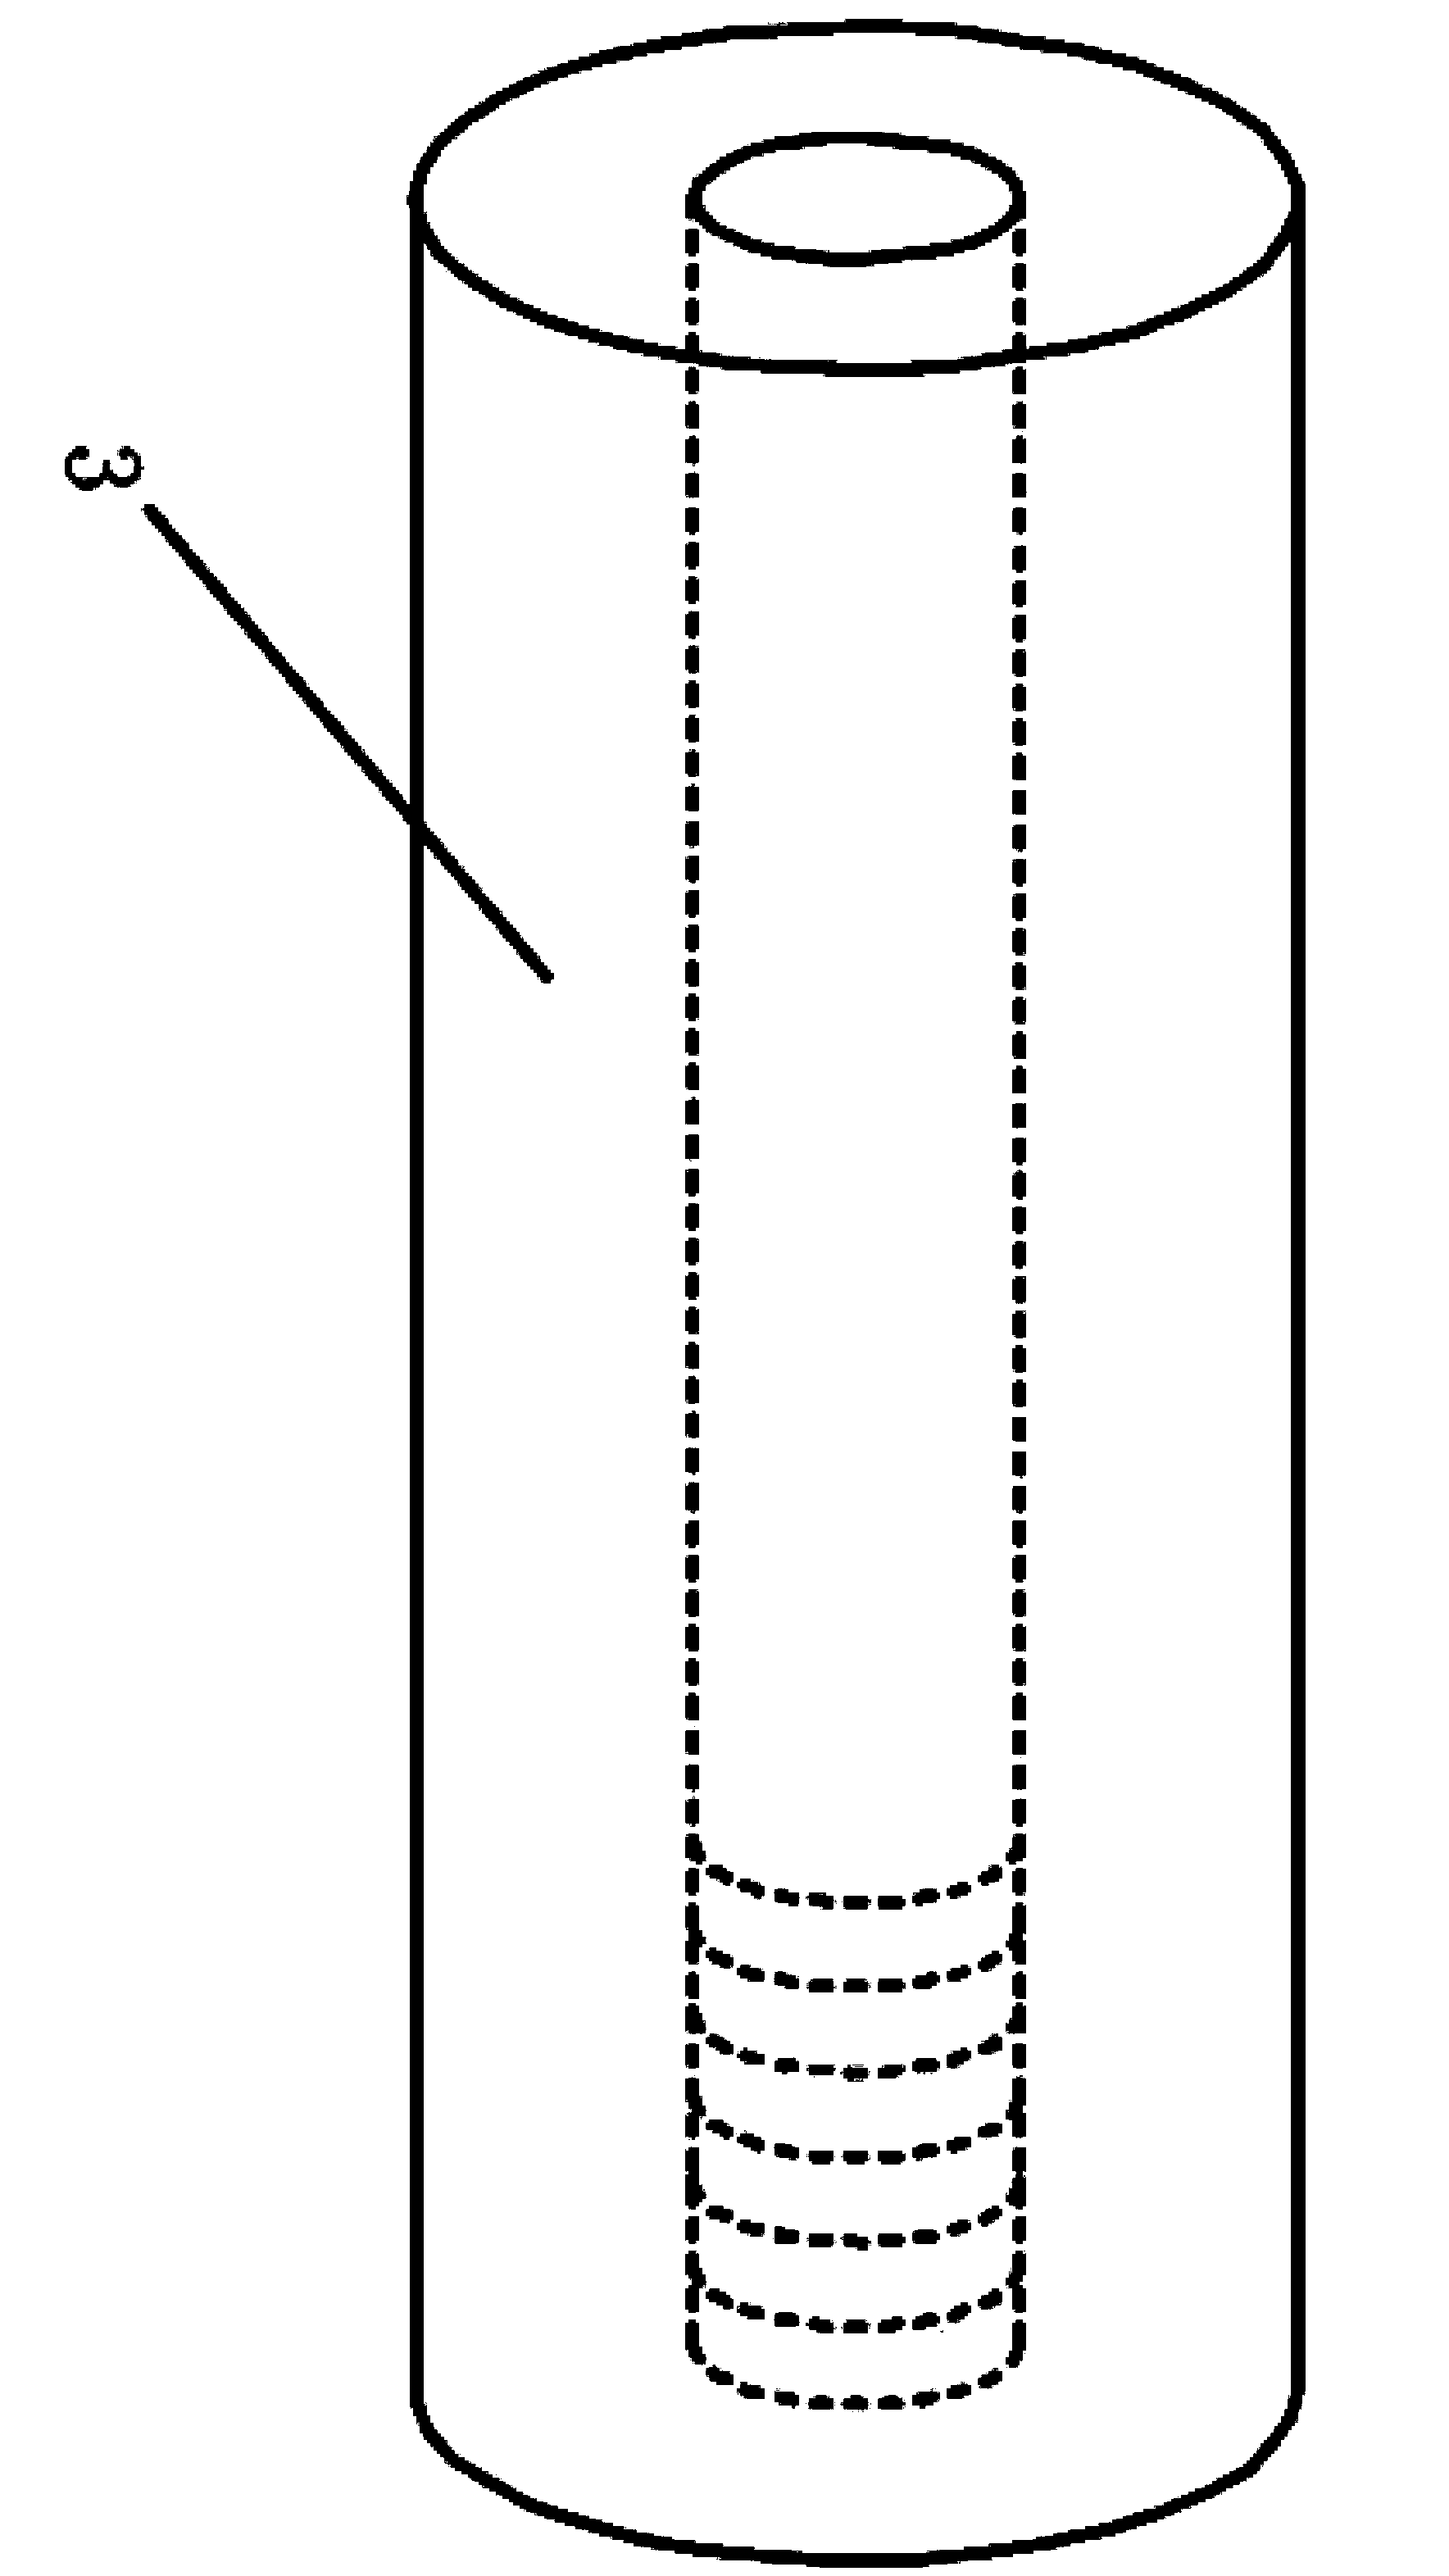 Connecting method of cue